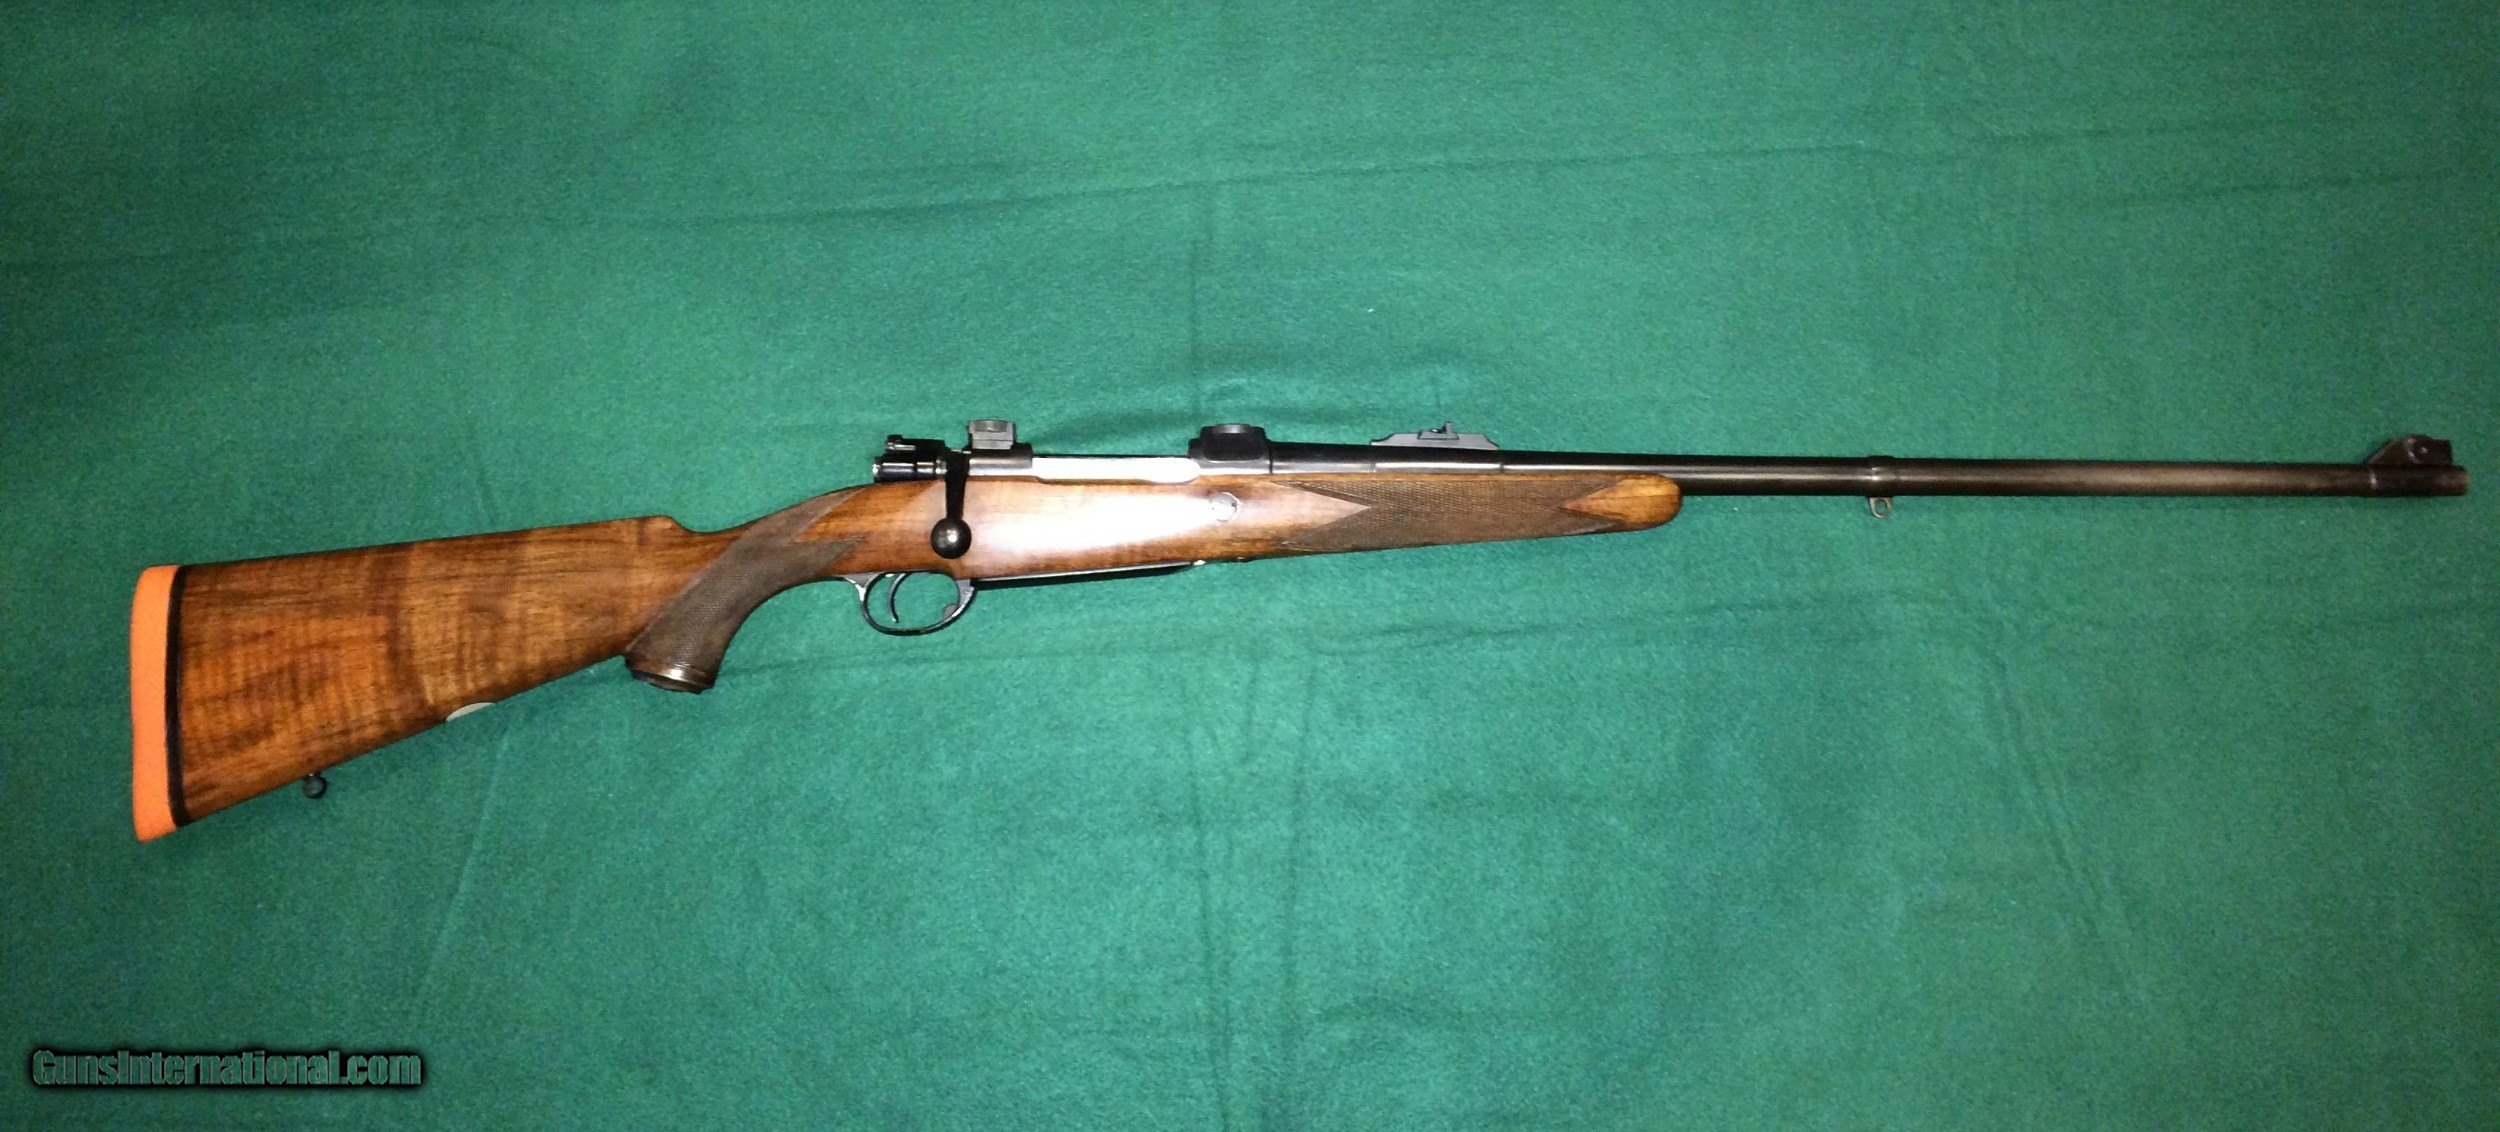 Holland Holland 375 H H Takedown Mauser Bolt Action Rifle For Sale